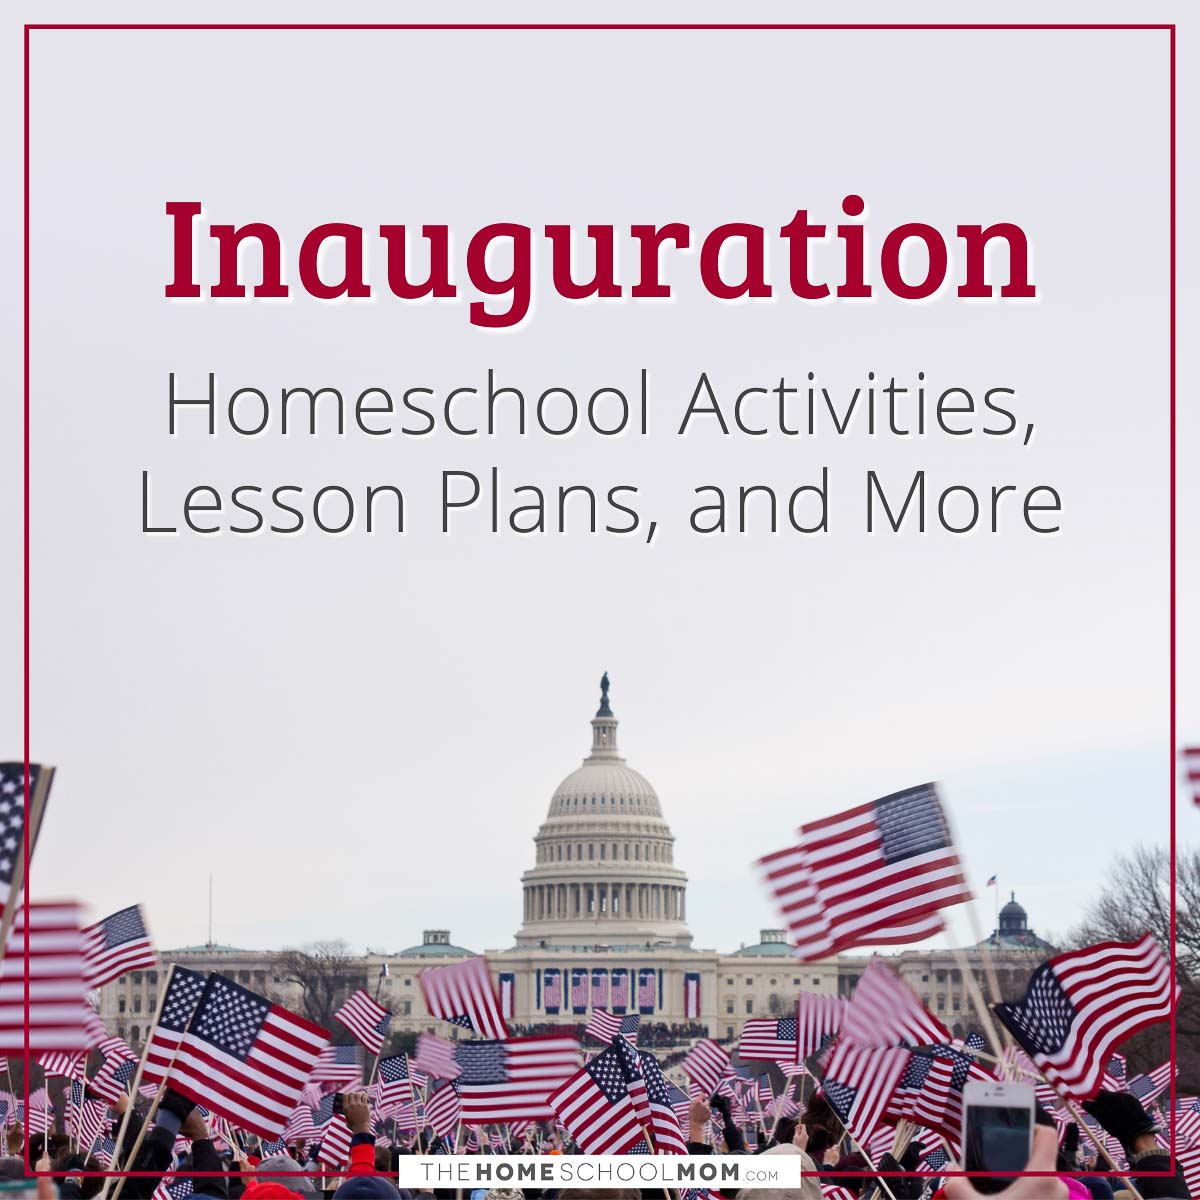 US Presidential Inauguration Day Homeschool Activities, Lesson Plans, and More